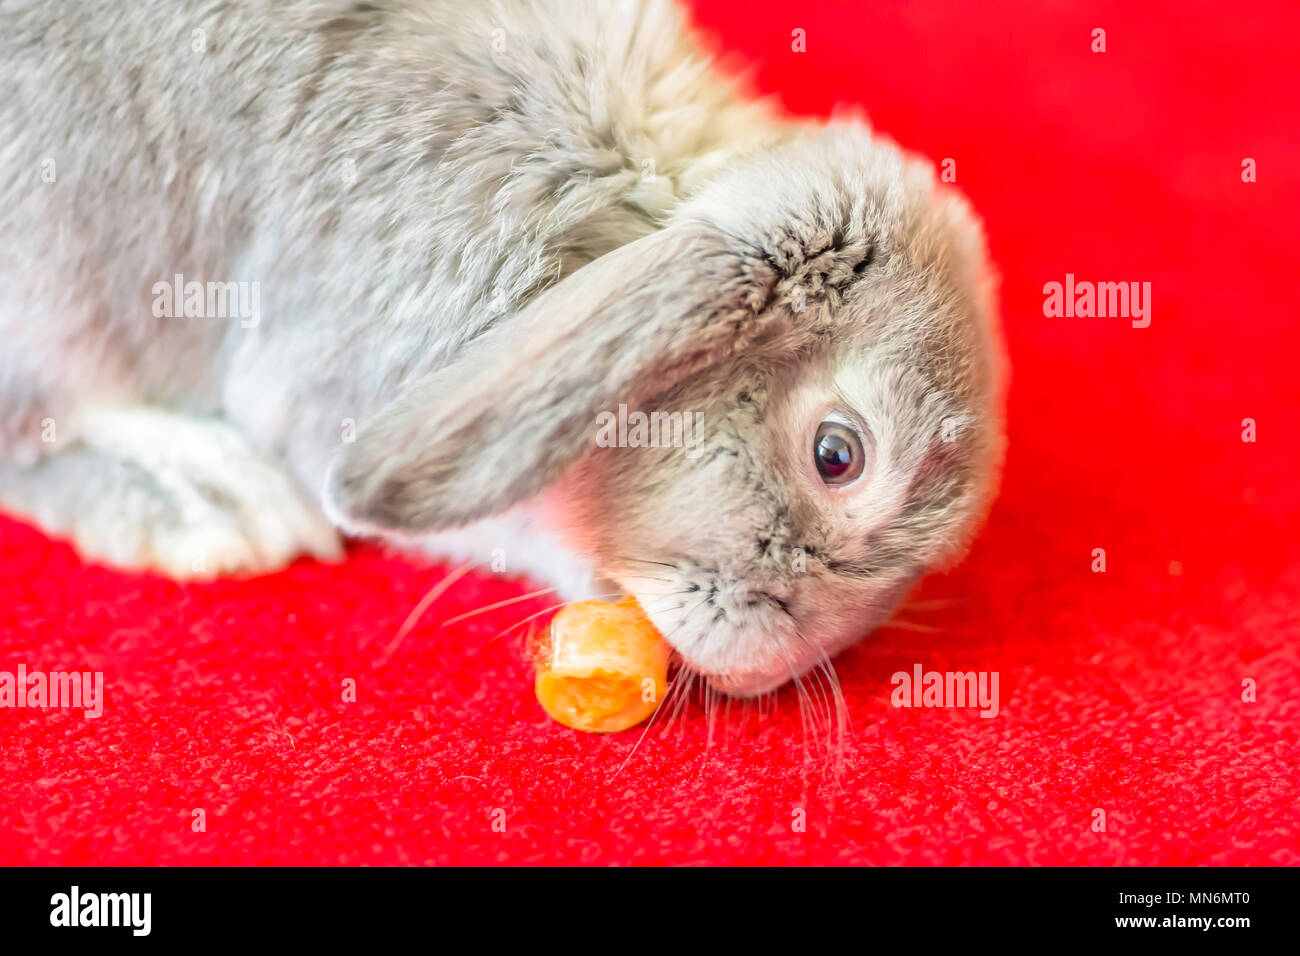 Grey rabbit eating carrot on red carpet.Cute and fluffy animal at home.Pets uk.Funny animals.Long haired silver bunny on room floor.Adorable animal. Stock Photo